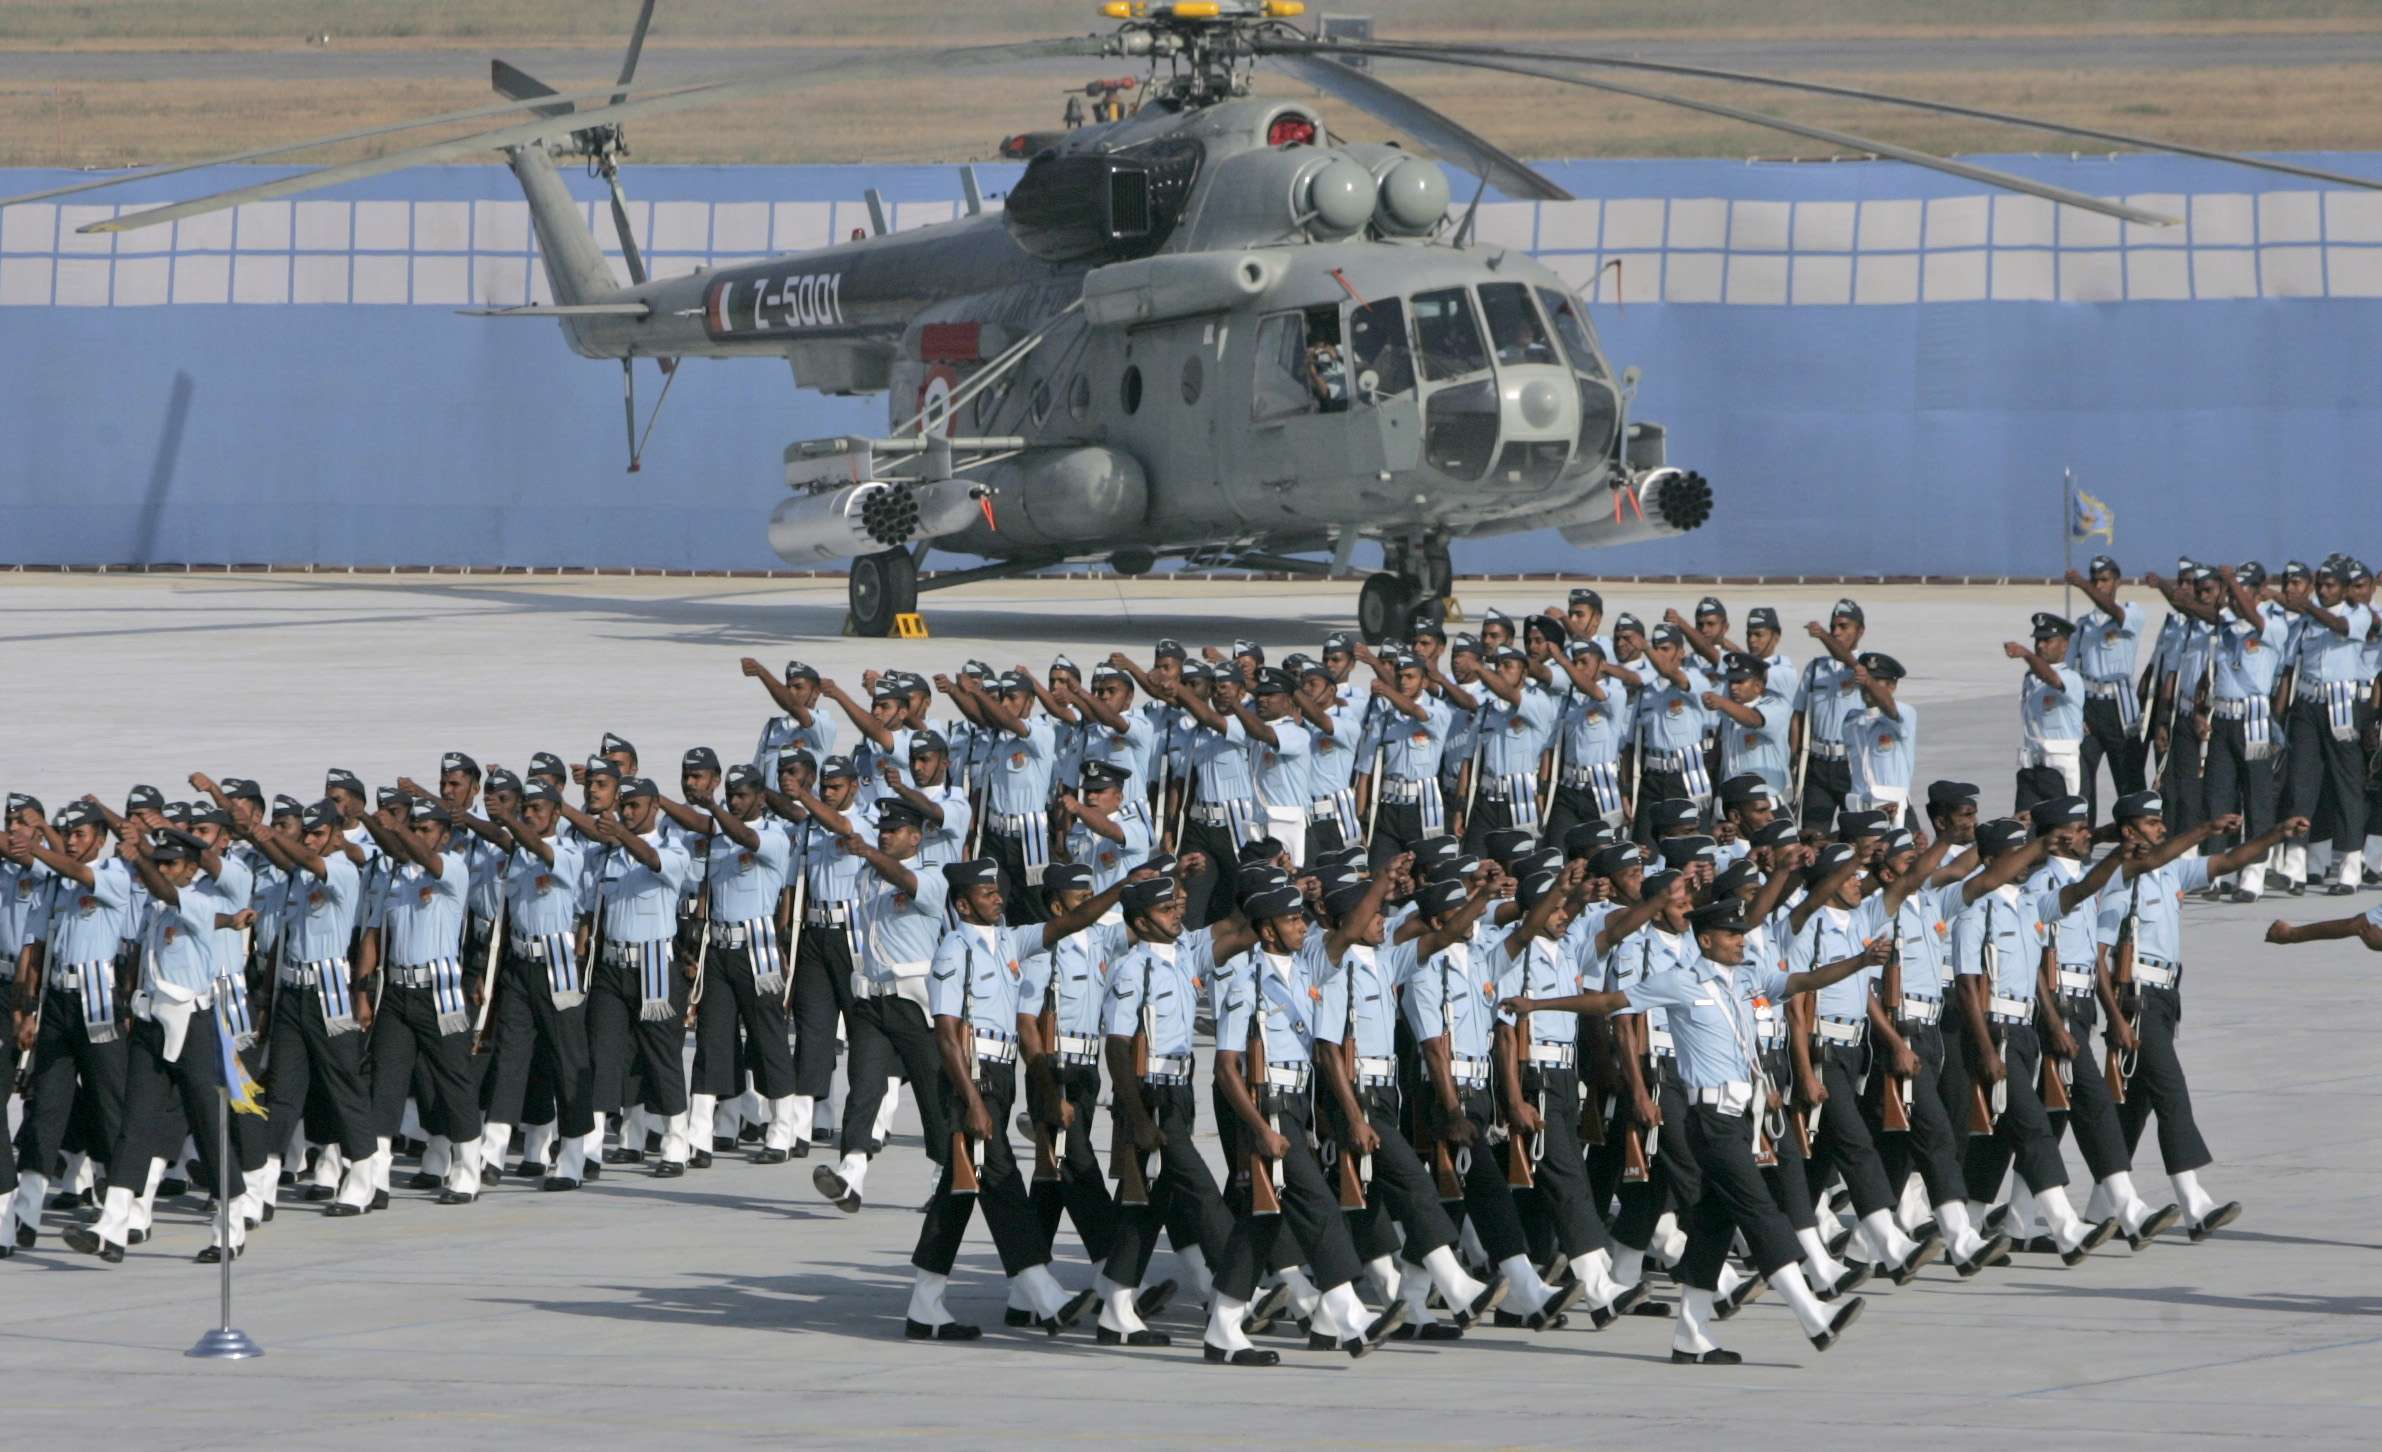 The latest version of India’s Mi-17 is the V-5.